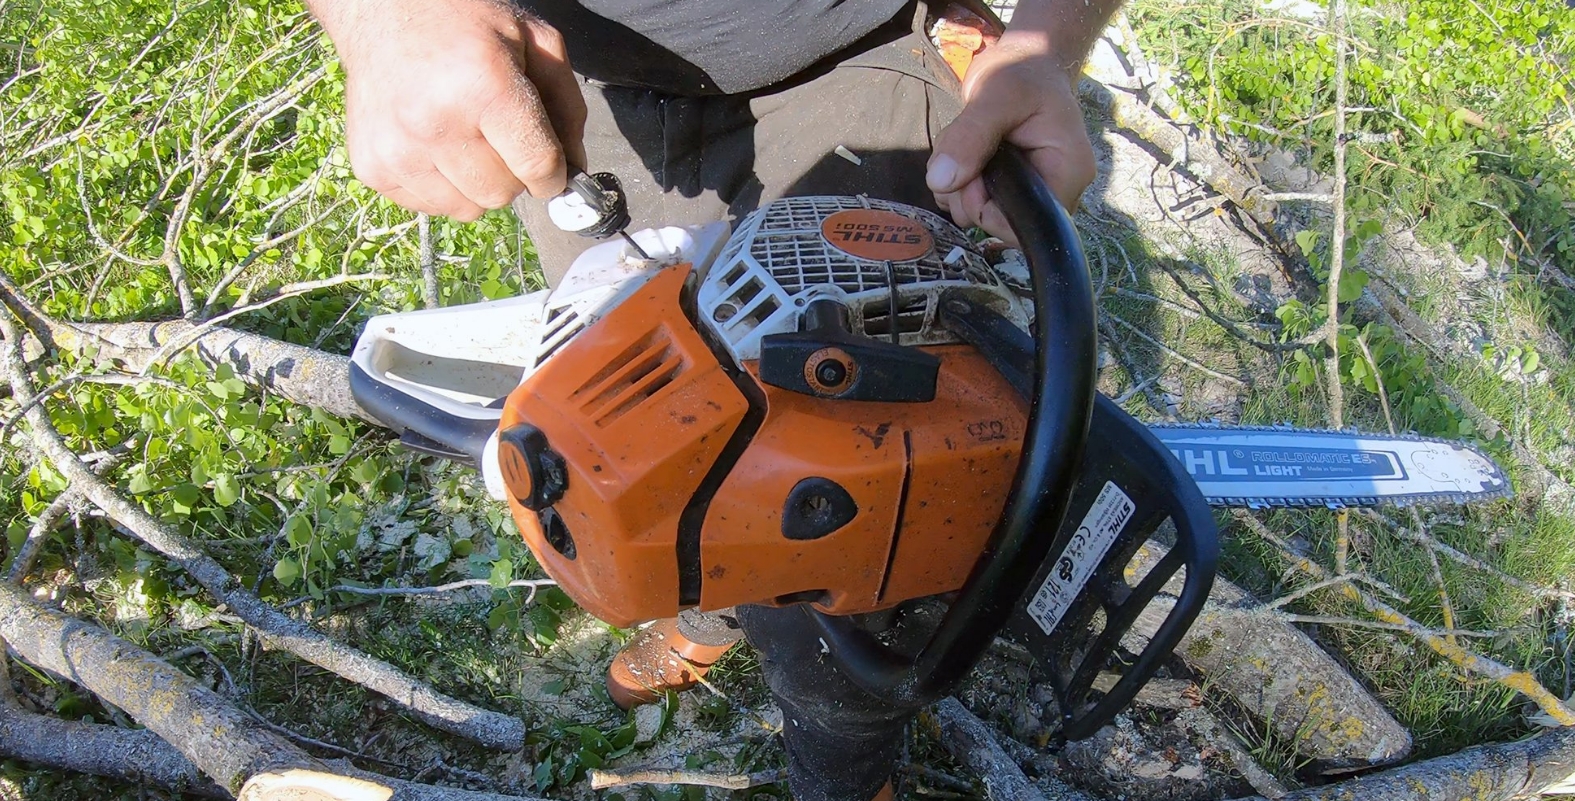 The result after an extended period of testing on the Stihl MS 500i